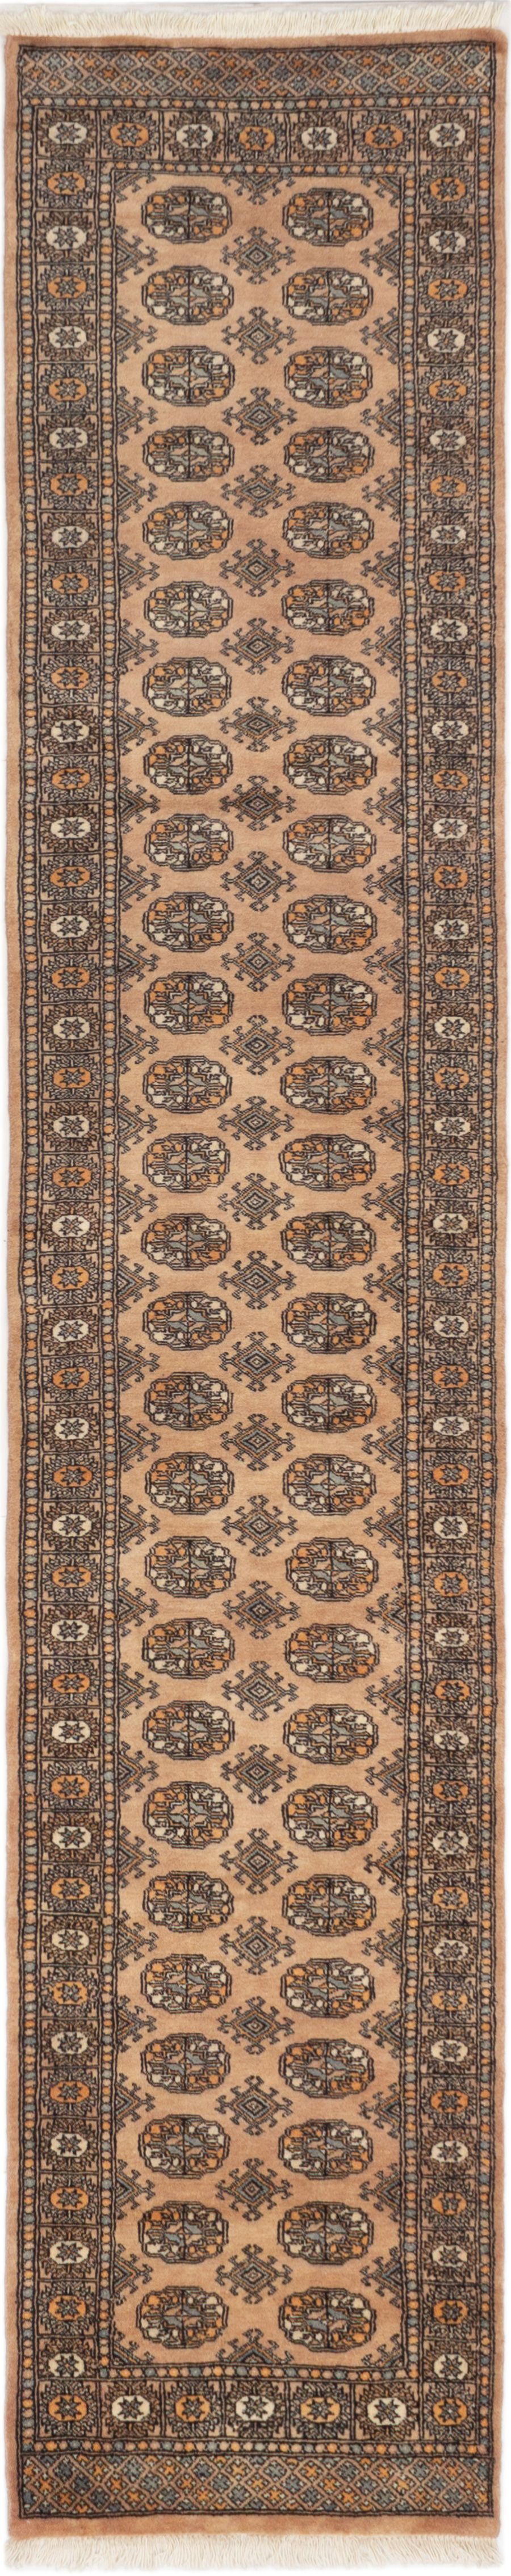 Hand-knotted Finest Peshawar Bokhara Tan Wool Rug 2'7" x 13'1" Size: 2'7" x 13'1"  